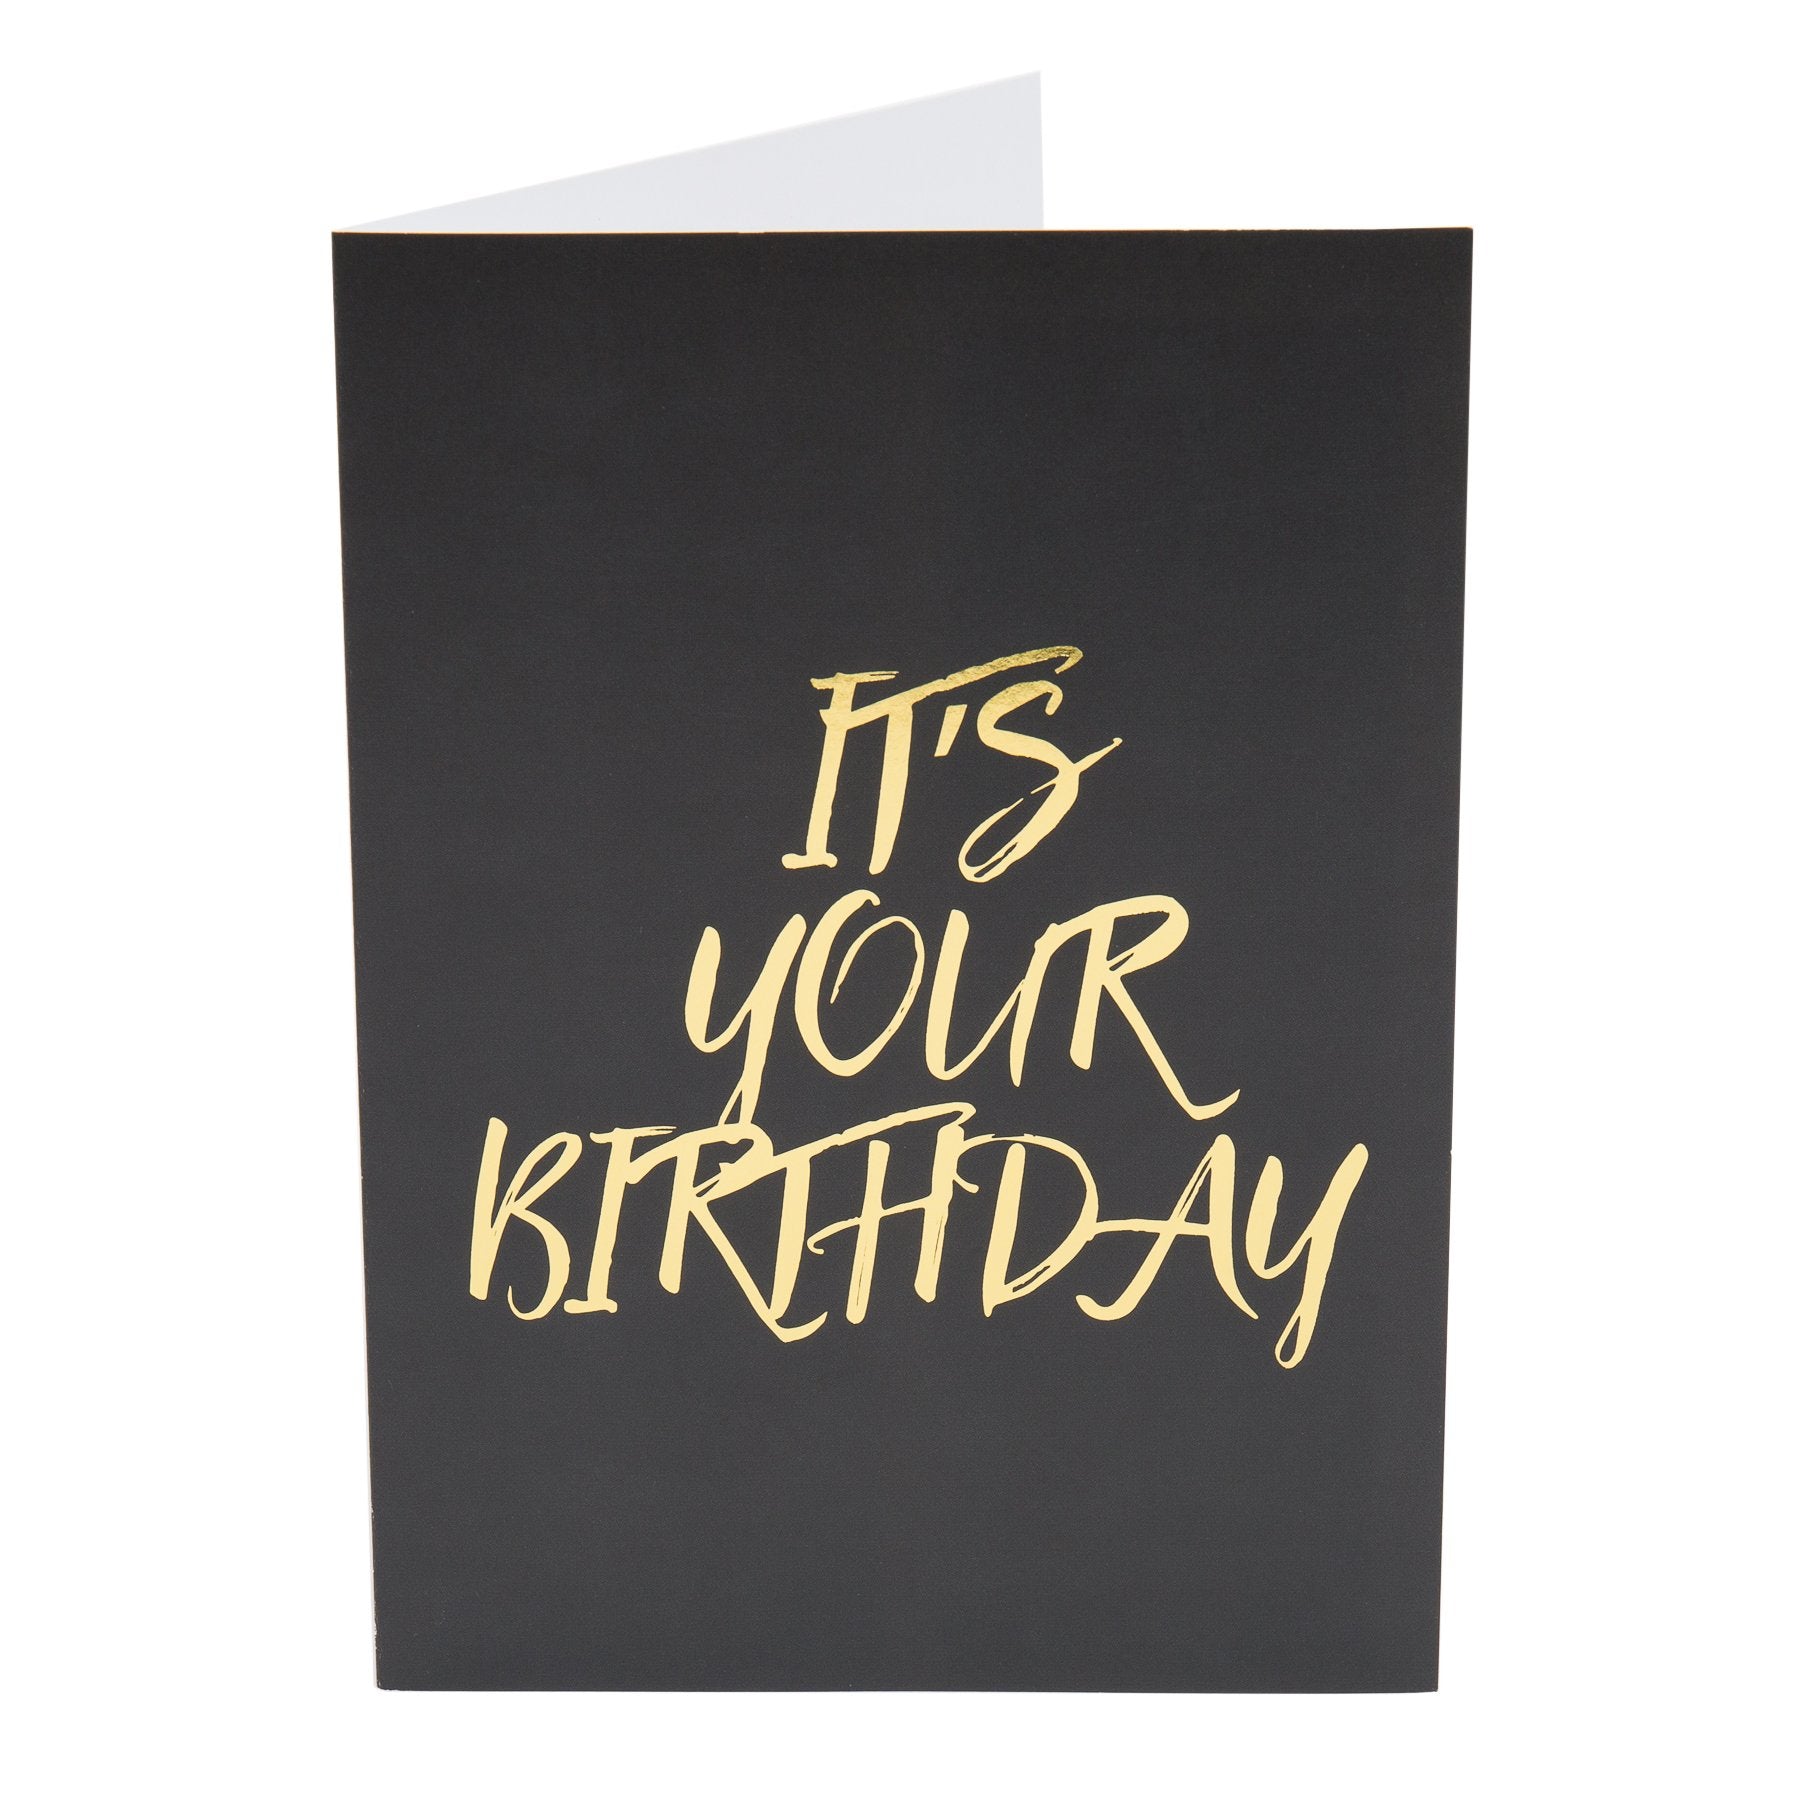 It's Your Birthday gift card showing the front of the card